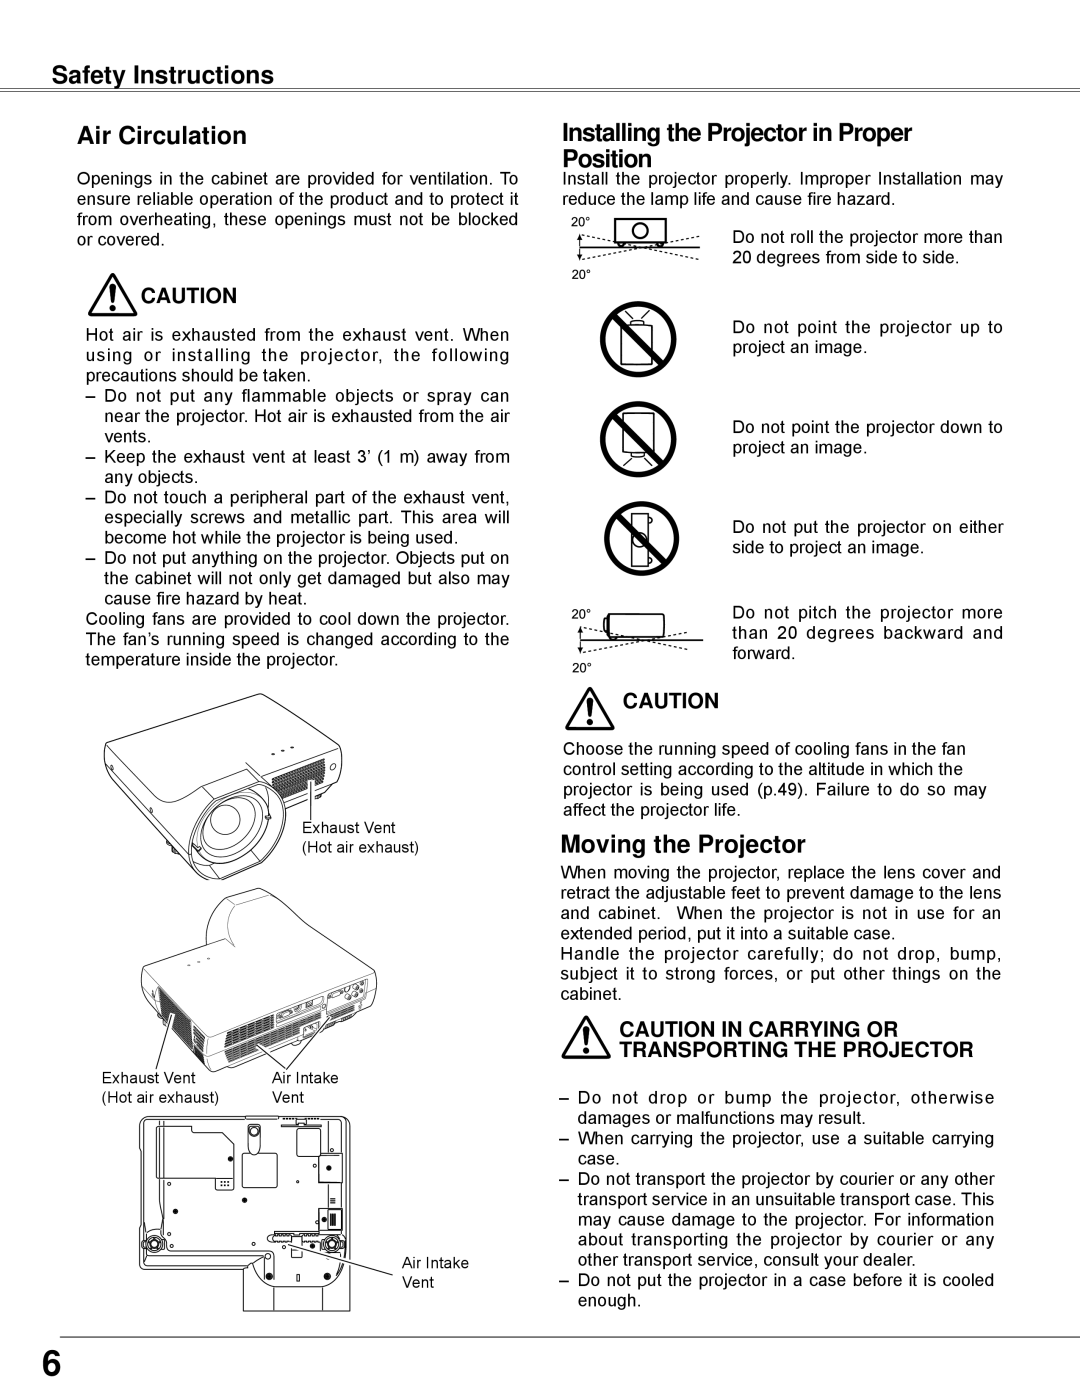 Sanyo PLC-WXE45 Safety Instructions Air Circulation, Installing the Projector in Proper Position, Moving the Projector 